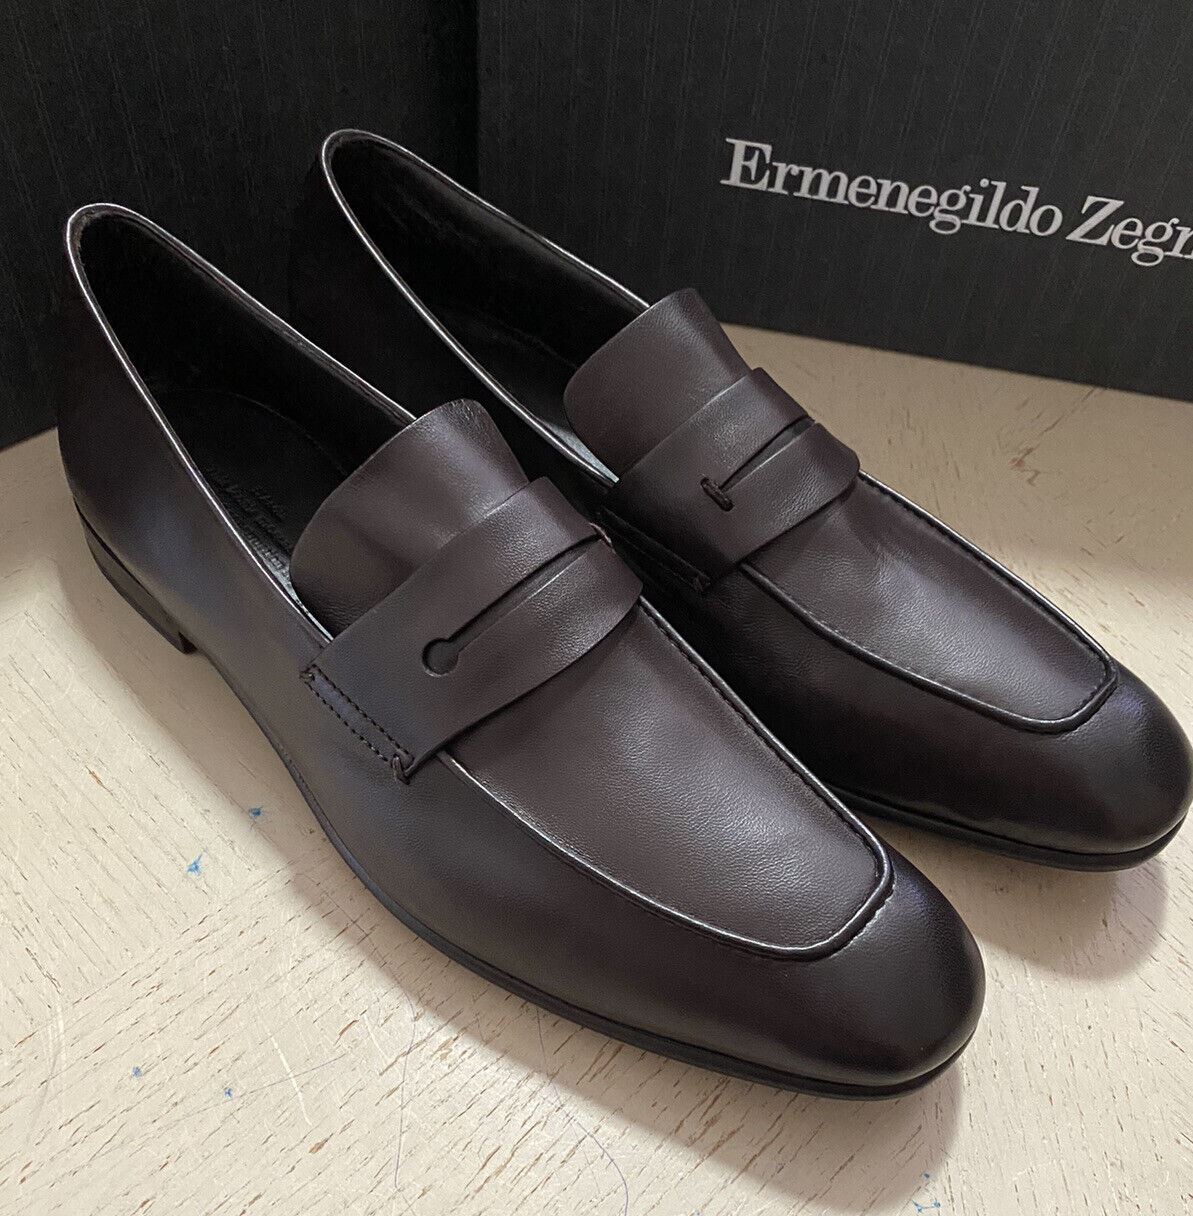 New $775 Ermenegildo Zegna Iconic Moccasin Leather Loafers Shoe DK Brown 10.5 US